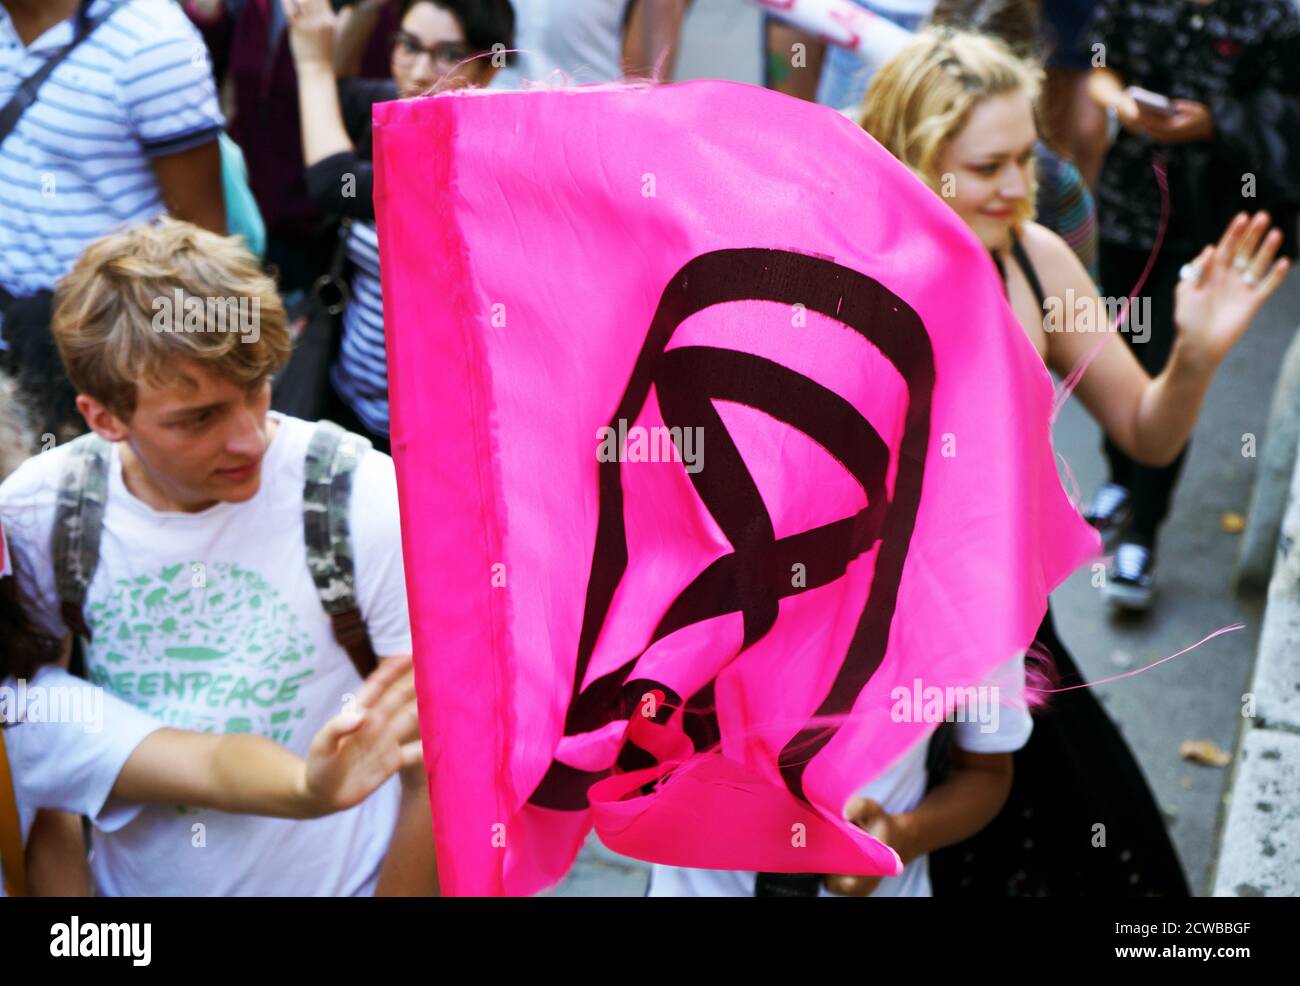 Climate emergency demonstration in London, 26th September 2019. The September 2019 climate strikes, (Global Week for Future), were a series of international strikes and protests to demand action be taken to address climate change. The strikes took place from 20-27 September. The protests took place across 4,500 locations in 150 countries. Stock Photo